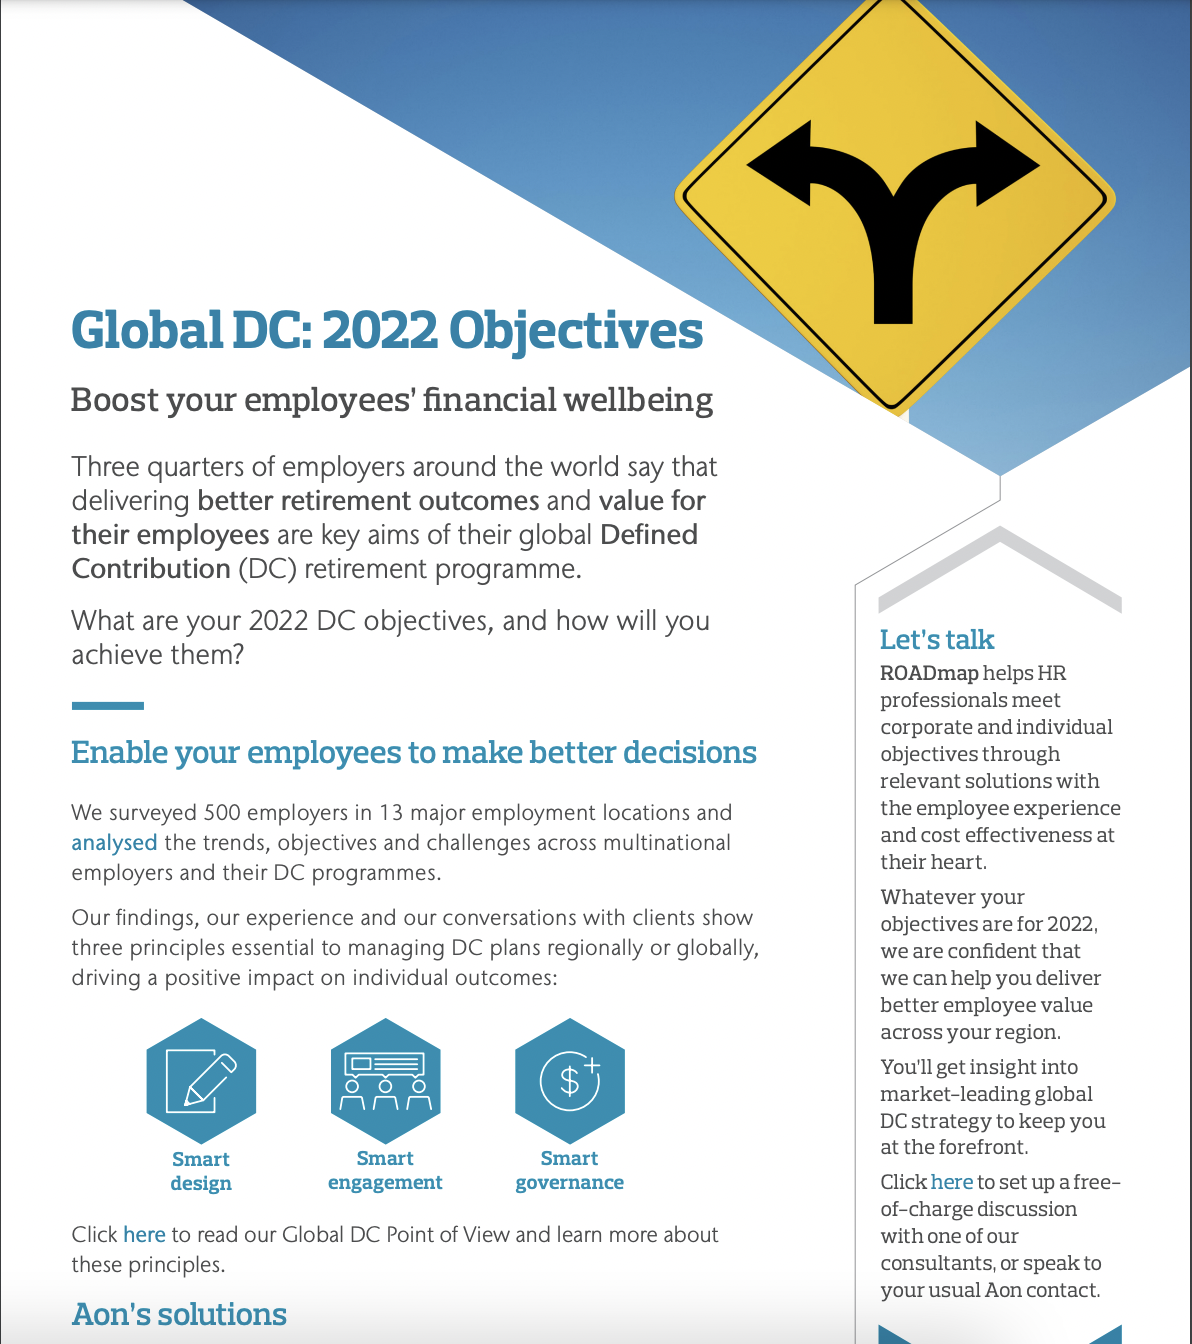 Global DC: 2022 Objectives